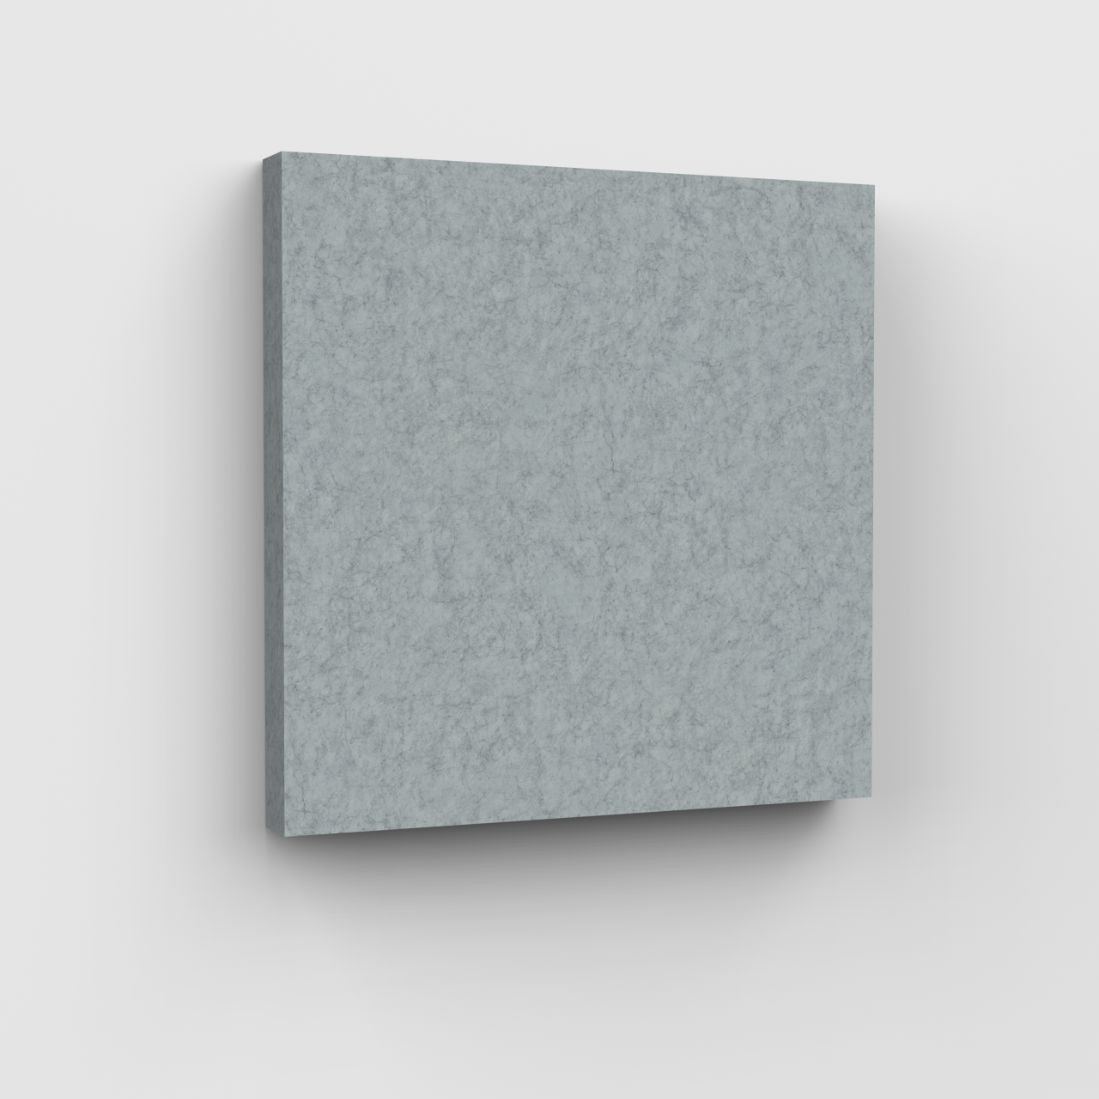 100% Recycled PET Felt Acoustic Square 60mm Marble | Plastock